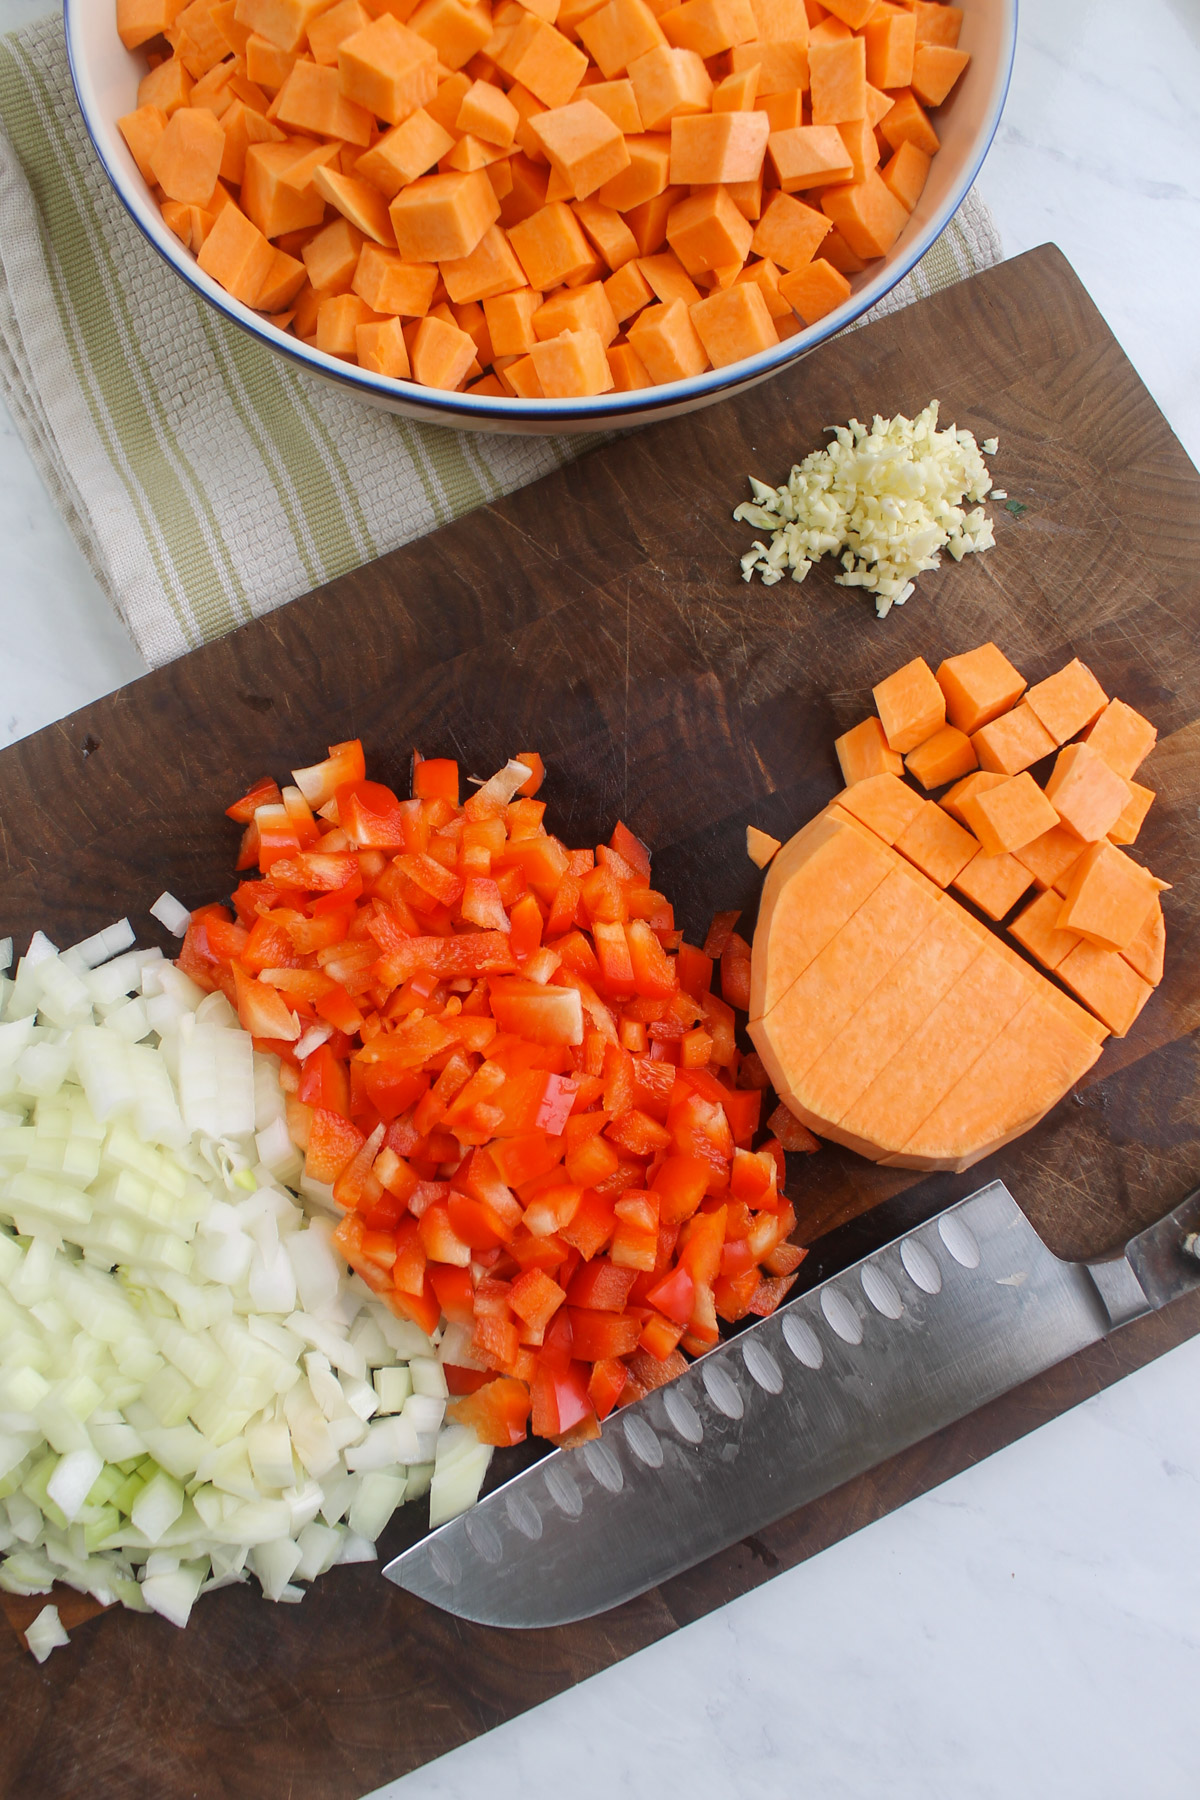 Chopped sweet potato, red bell pepper, onion and garlic on a cutting board.